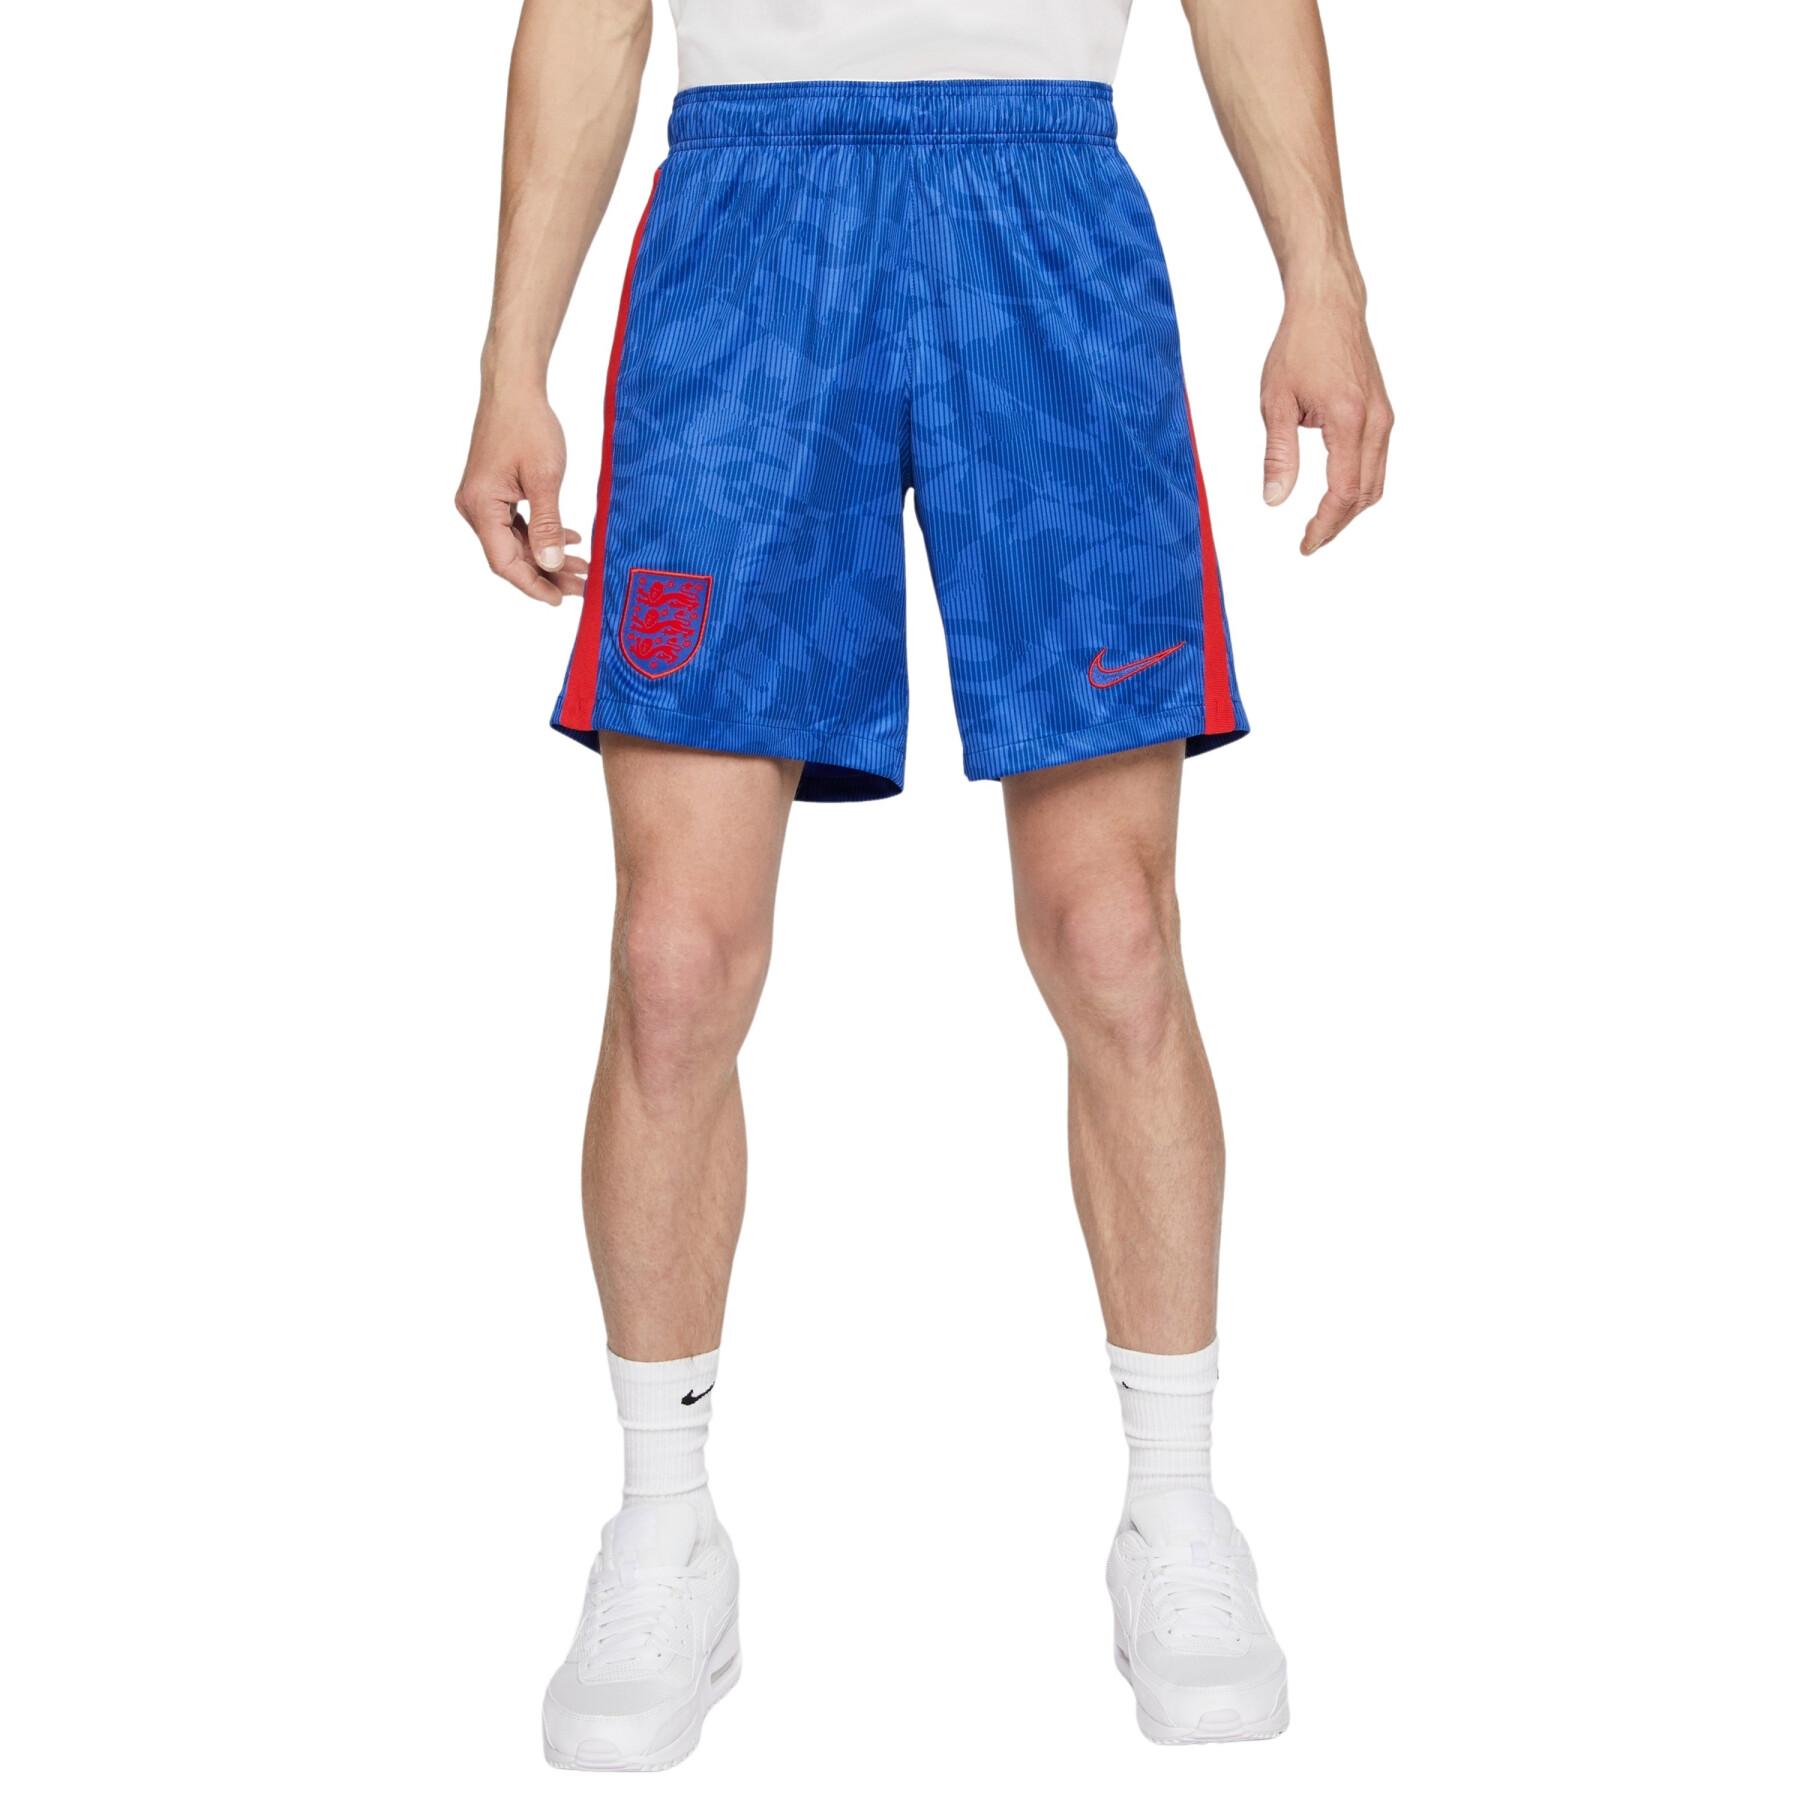 Outdoor-Shorts Angleterre 2020